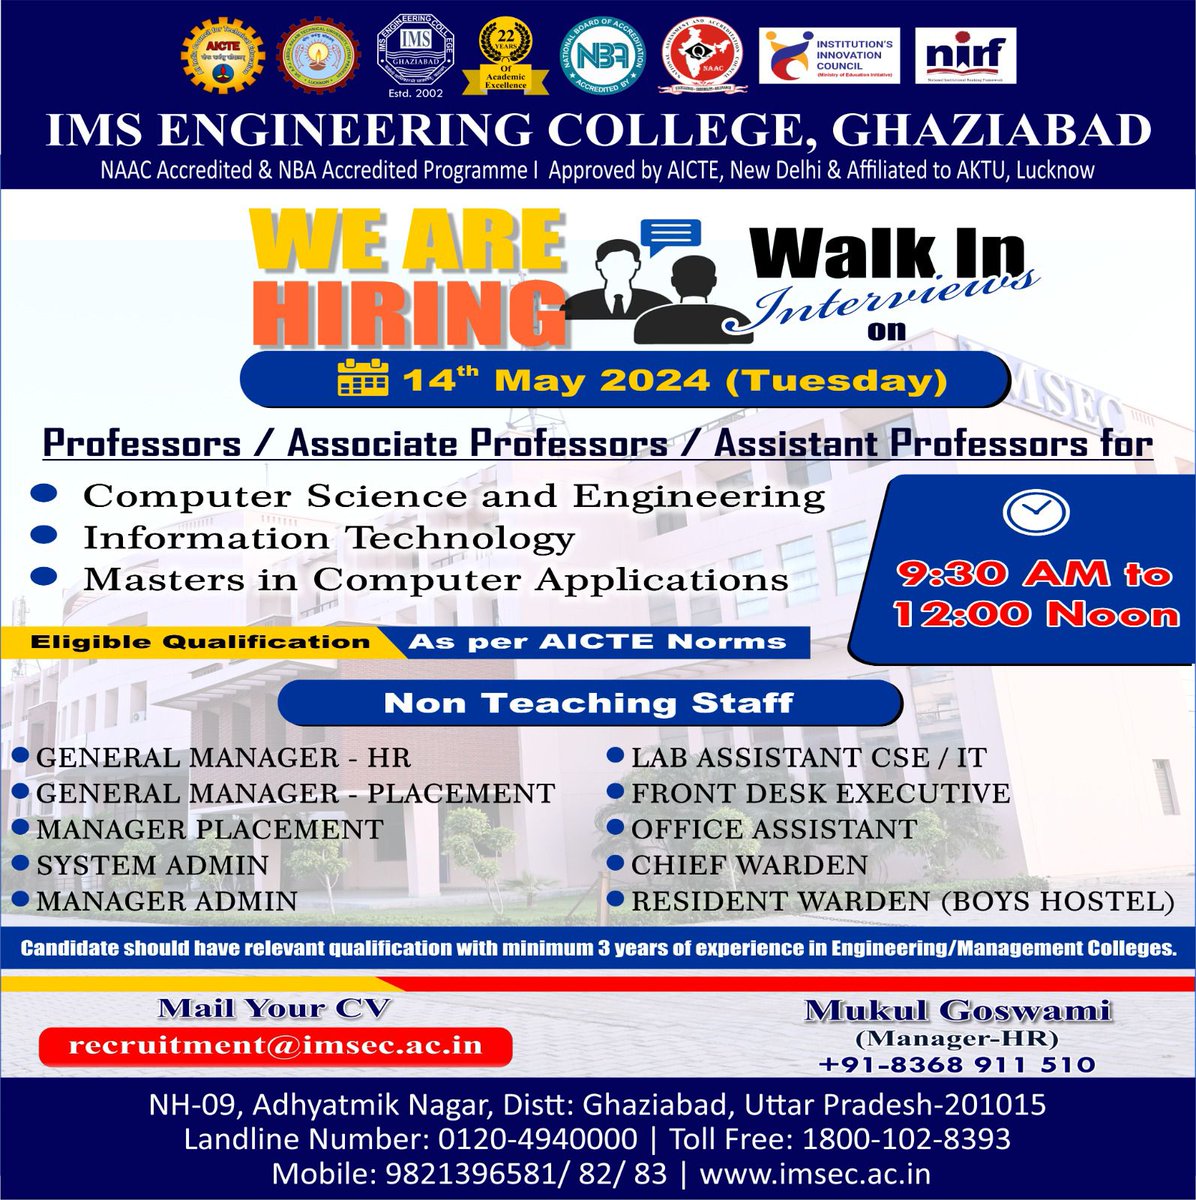 We are hiring...
.
.
.
#recruiter #IMS #recruiting #recruitment #hiring #Admin #jobs #warden #labassistant #executives #topjobs #OfficeAssistant #invitations #foryou #applicants #college #BestEngineeringCollege #manager #Admissions2024 #HR #placement